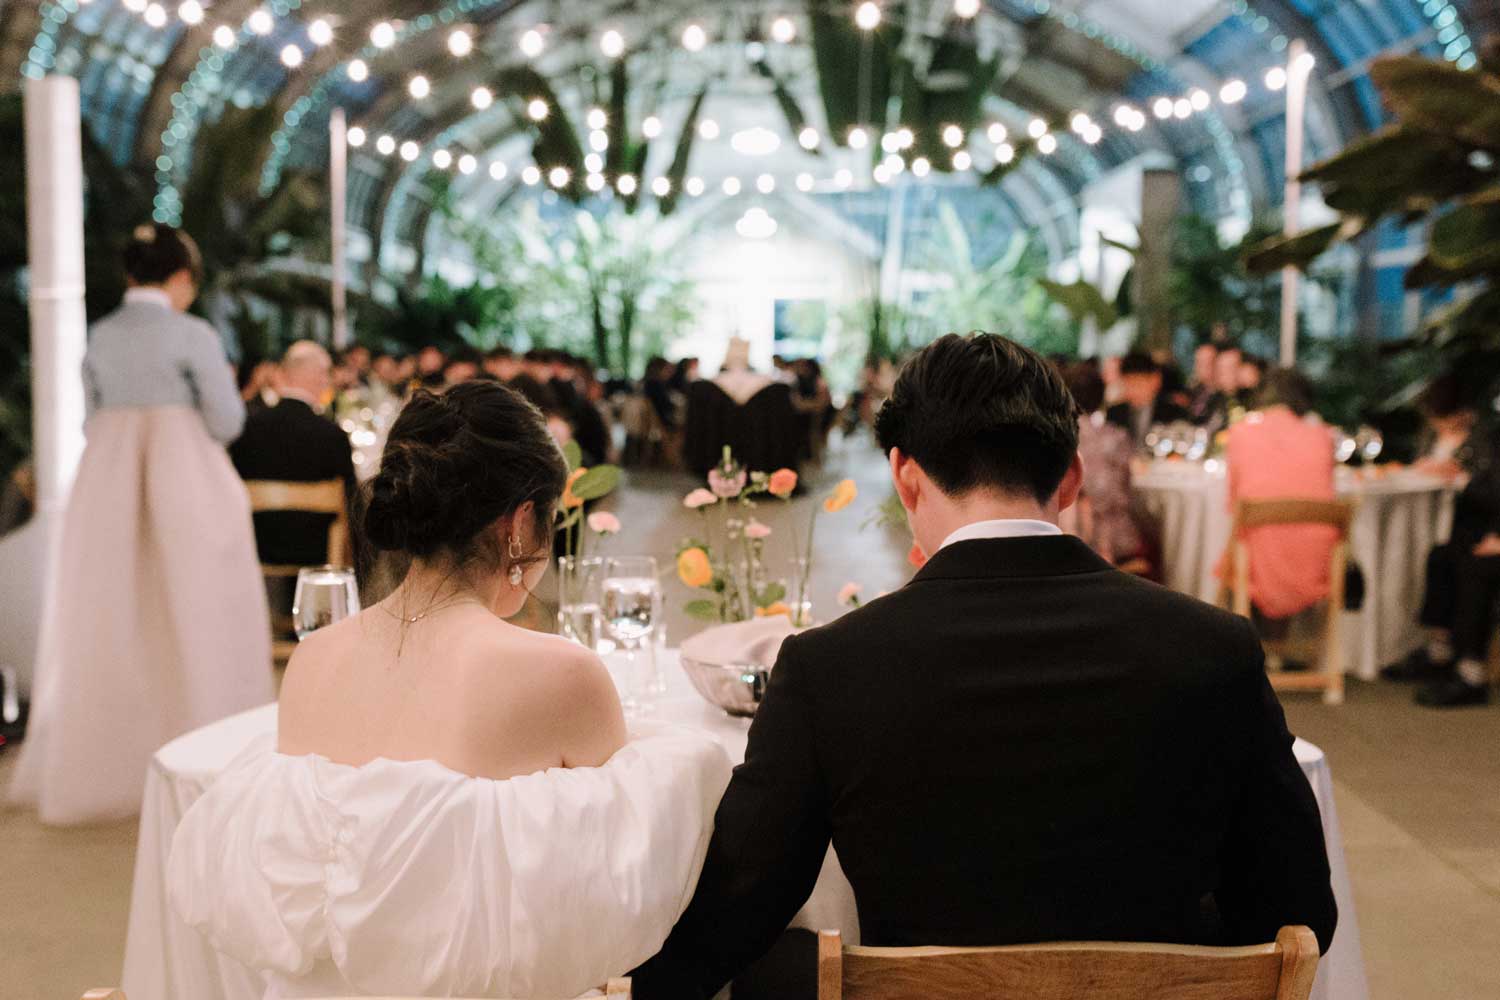 A couple seated at a wedding reception in a glasshouse venue.